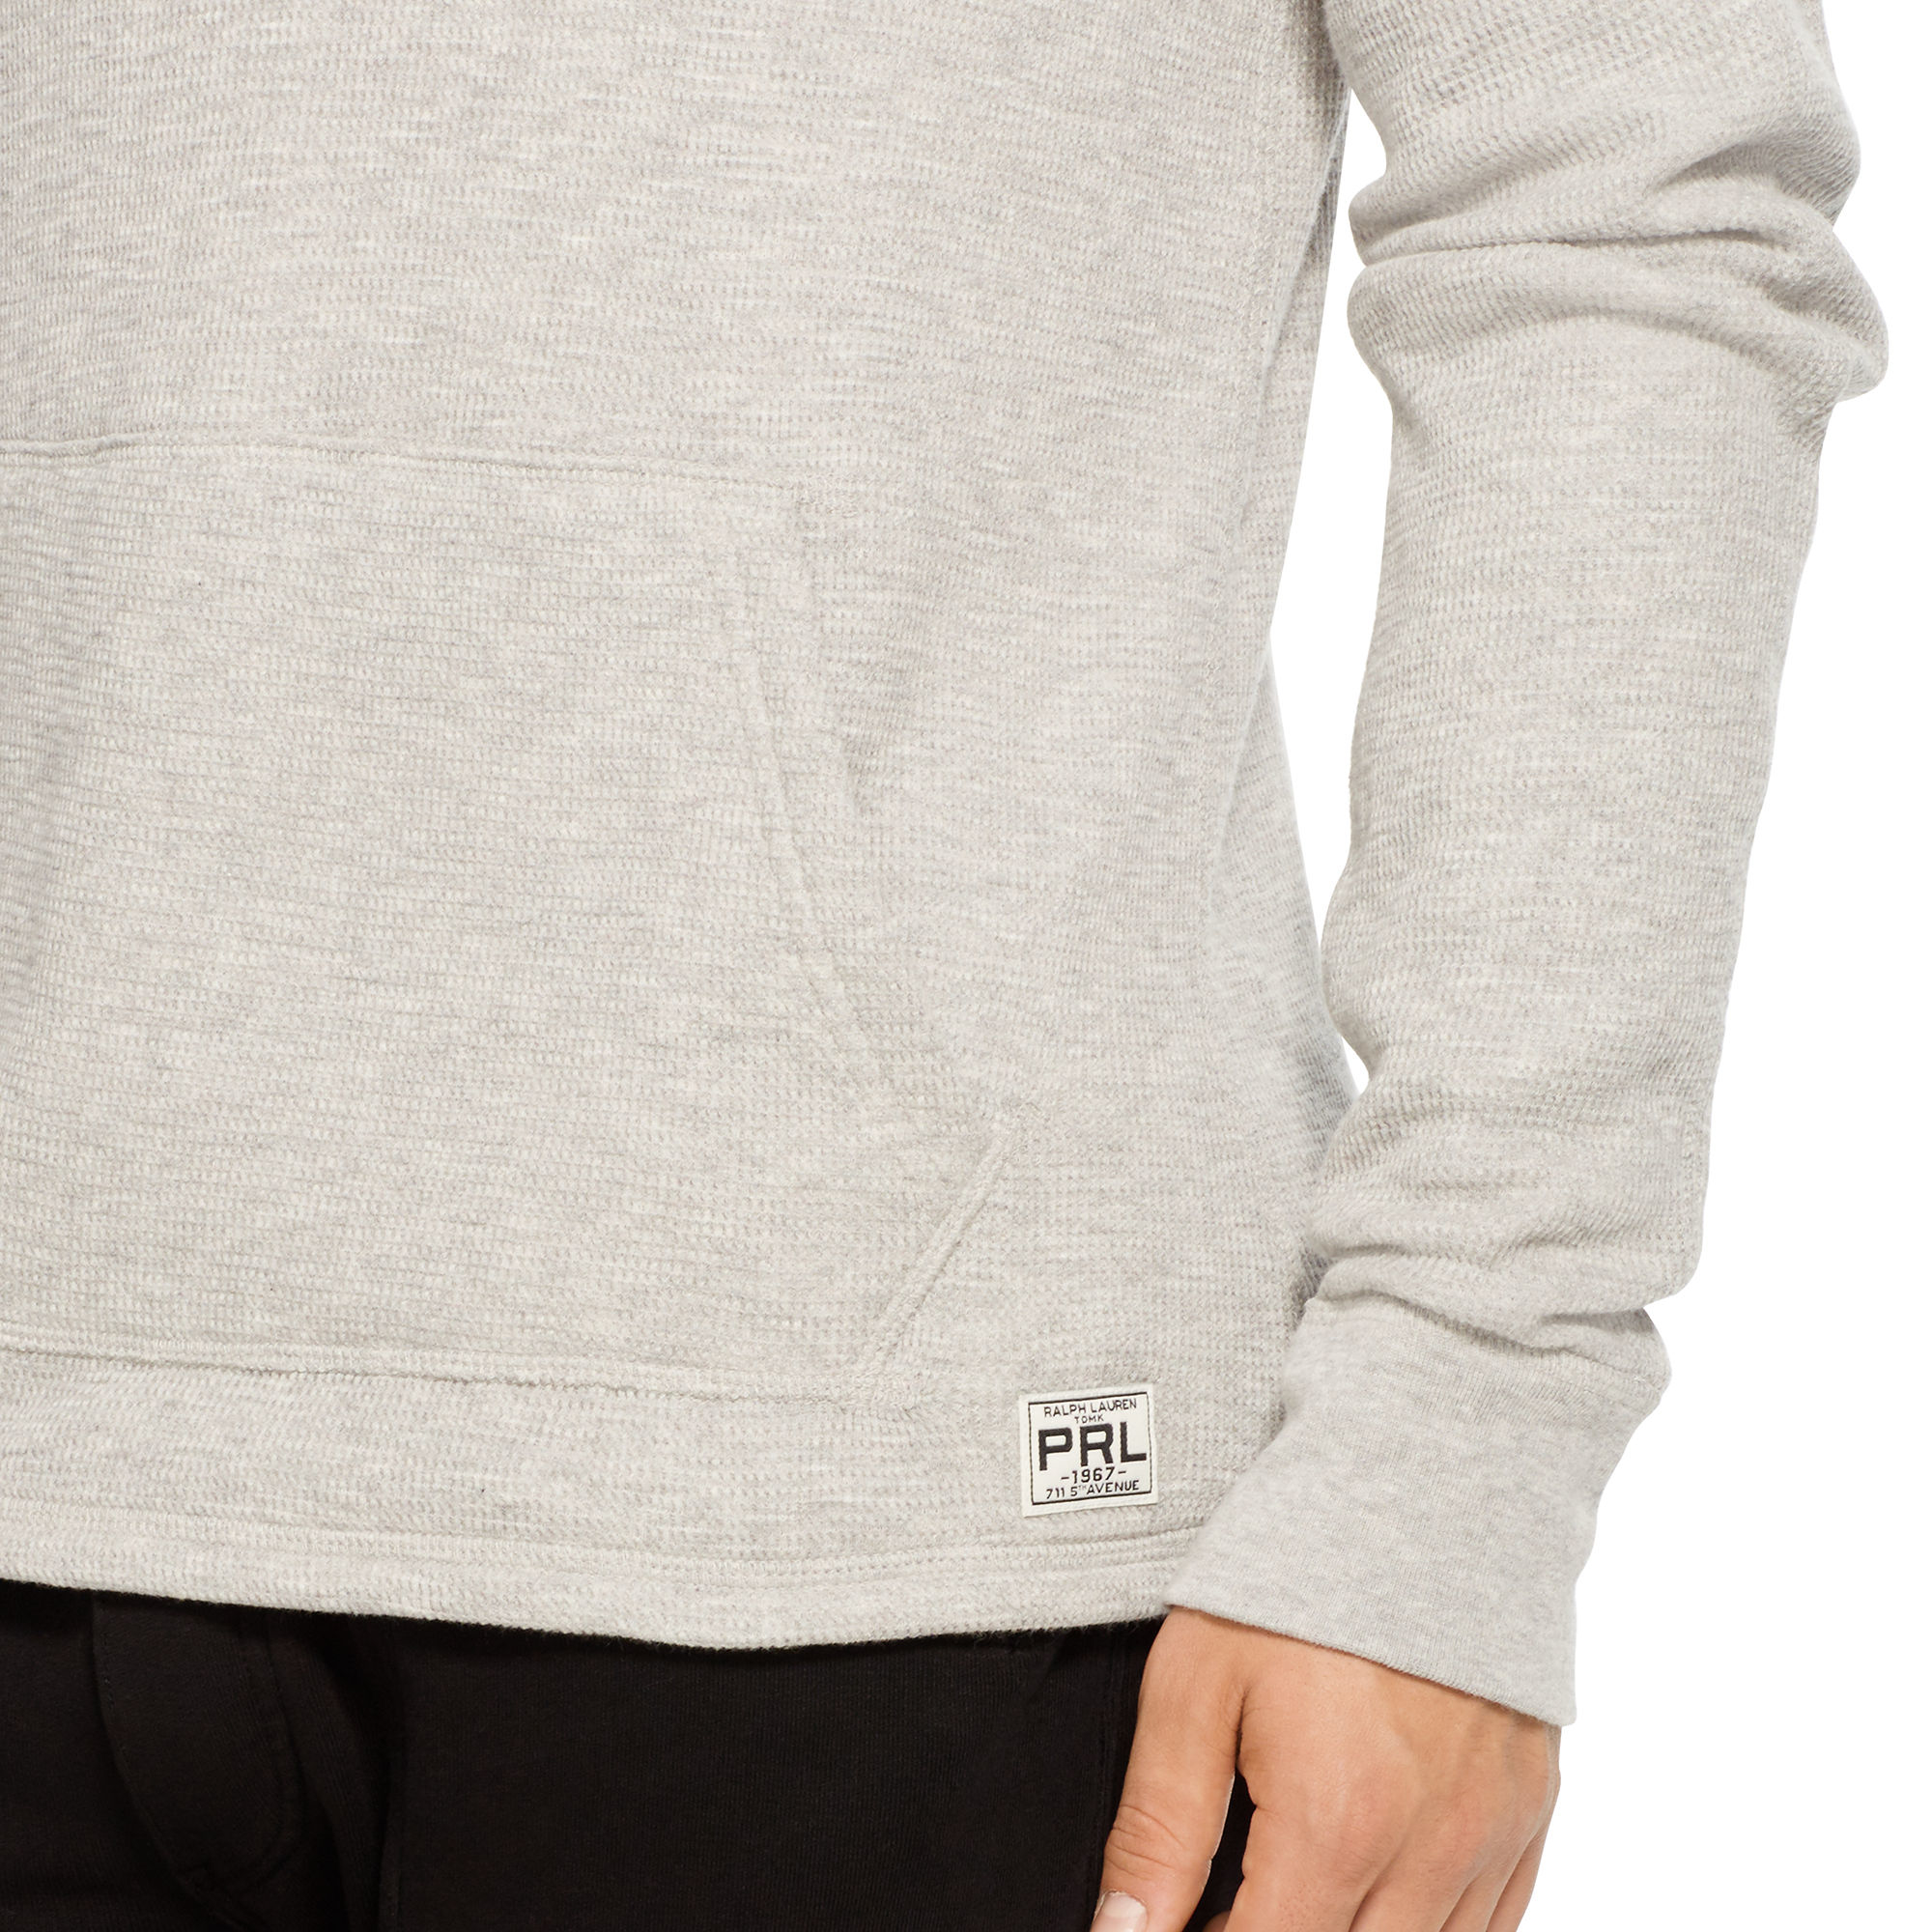 Polo Ralph Lauren Waffle-knit Pima Cotton Hoodie in Grey for Men - Lyst